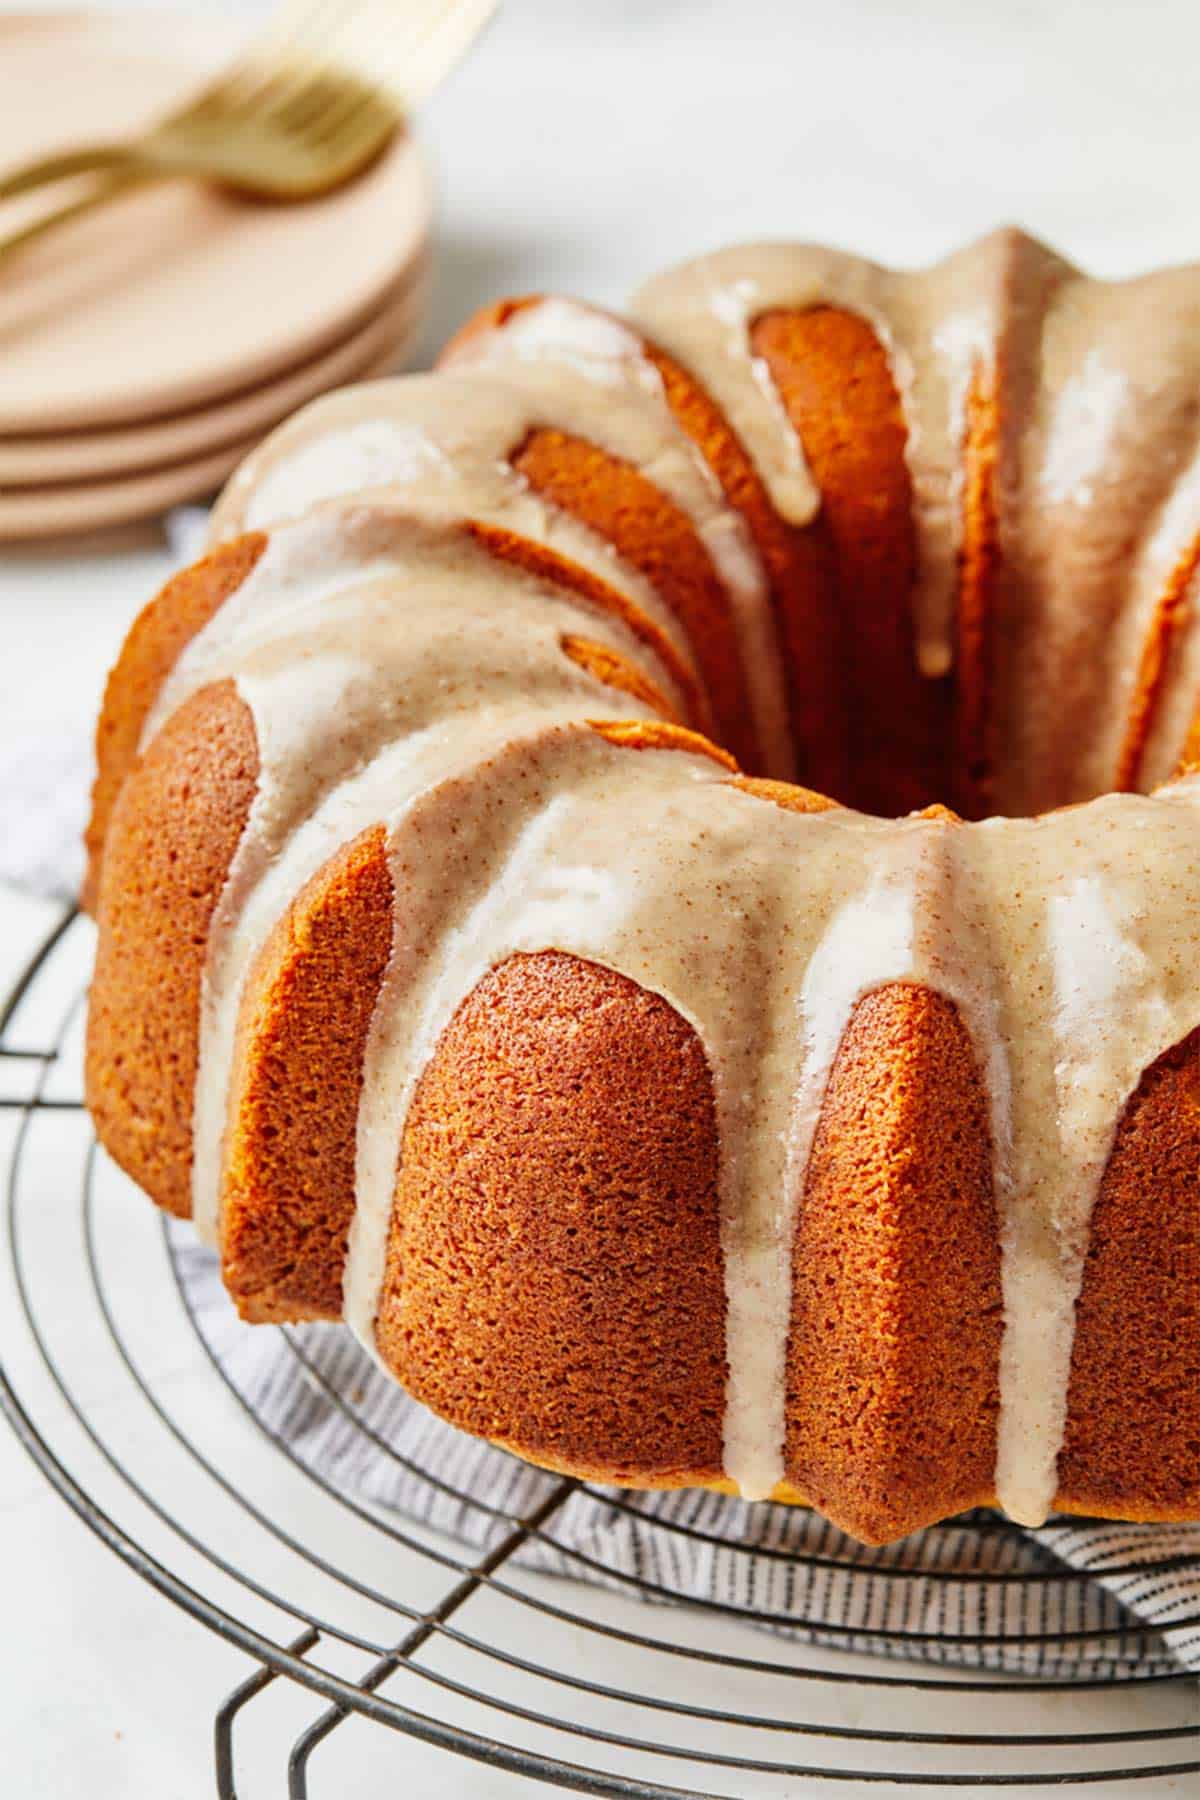 A pumpkin bundt cake on a wire rack on the table with a stack of plates in the background.